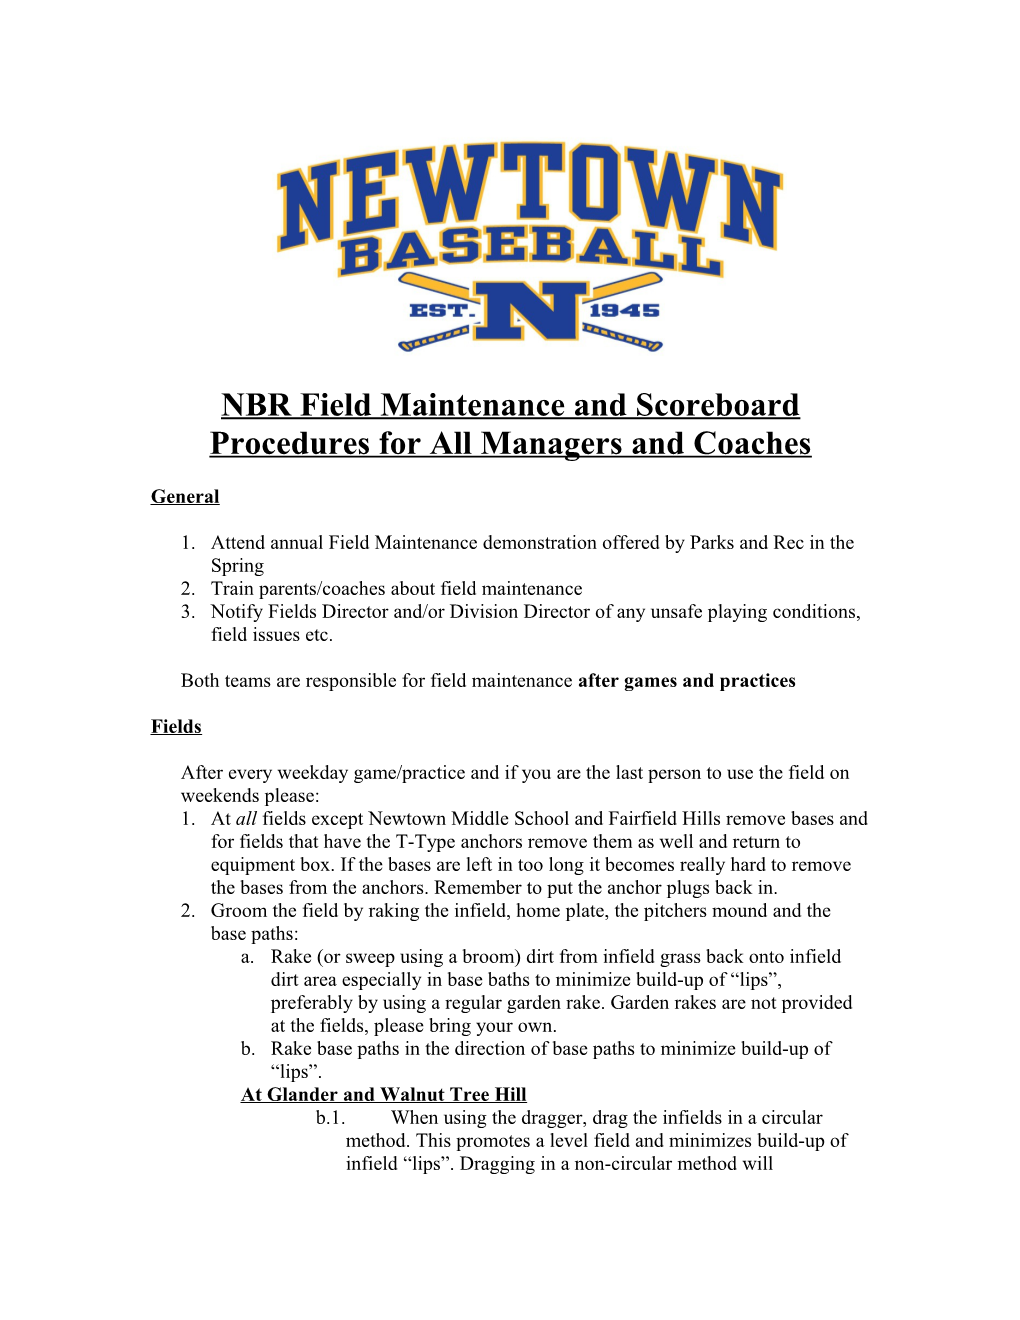 NBR Field Maintenance Requirements for All Managers